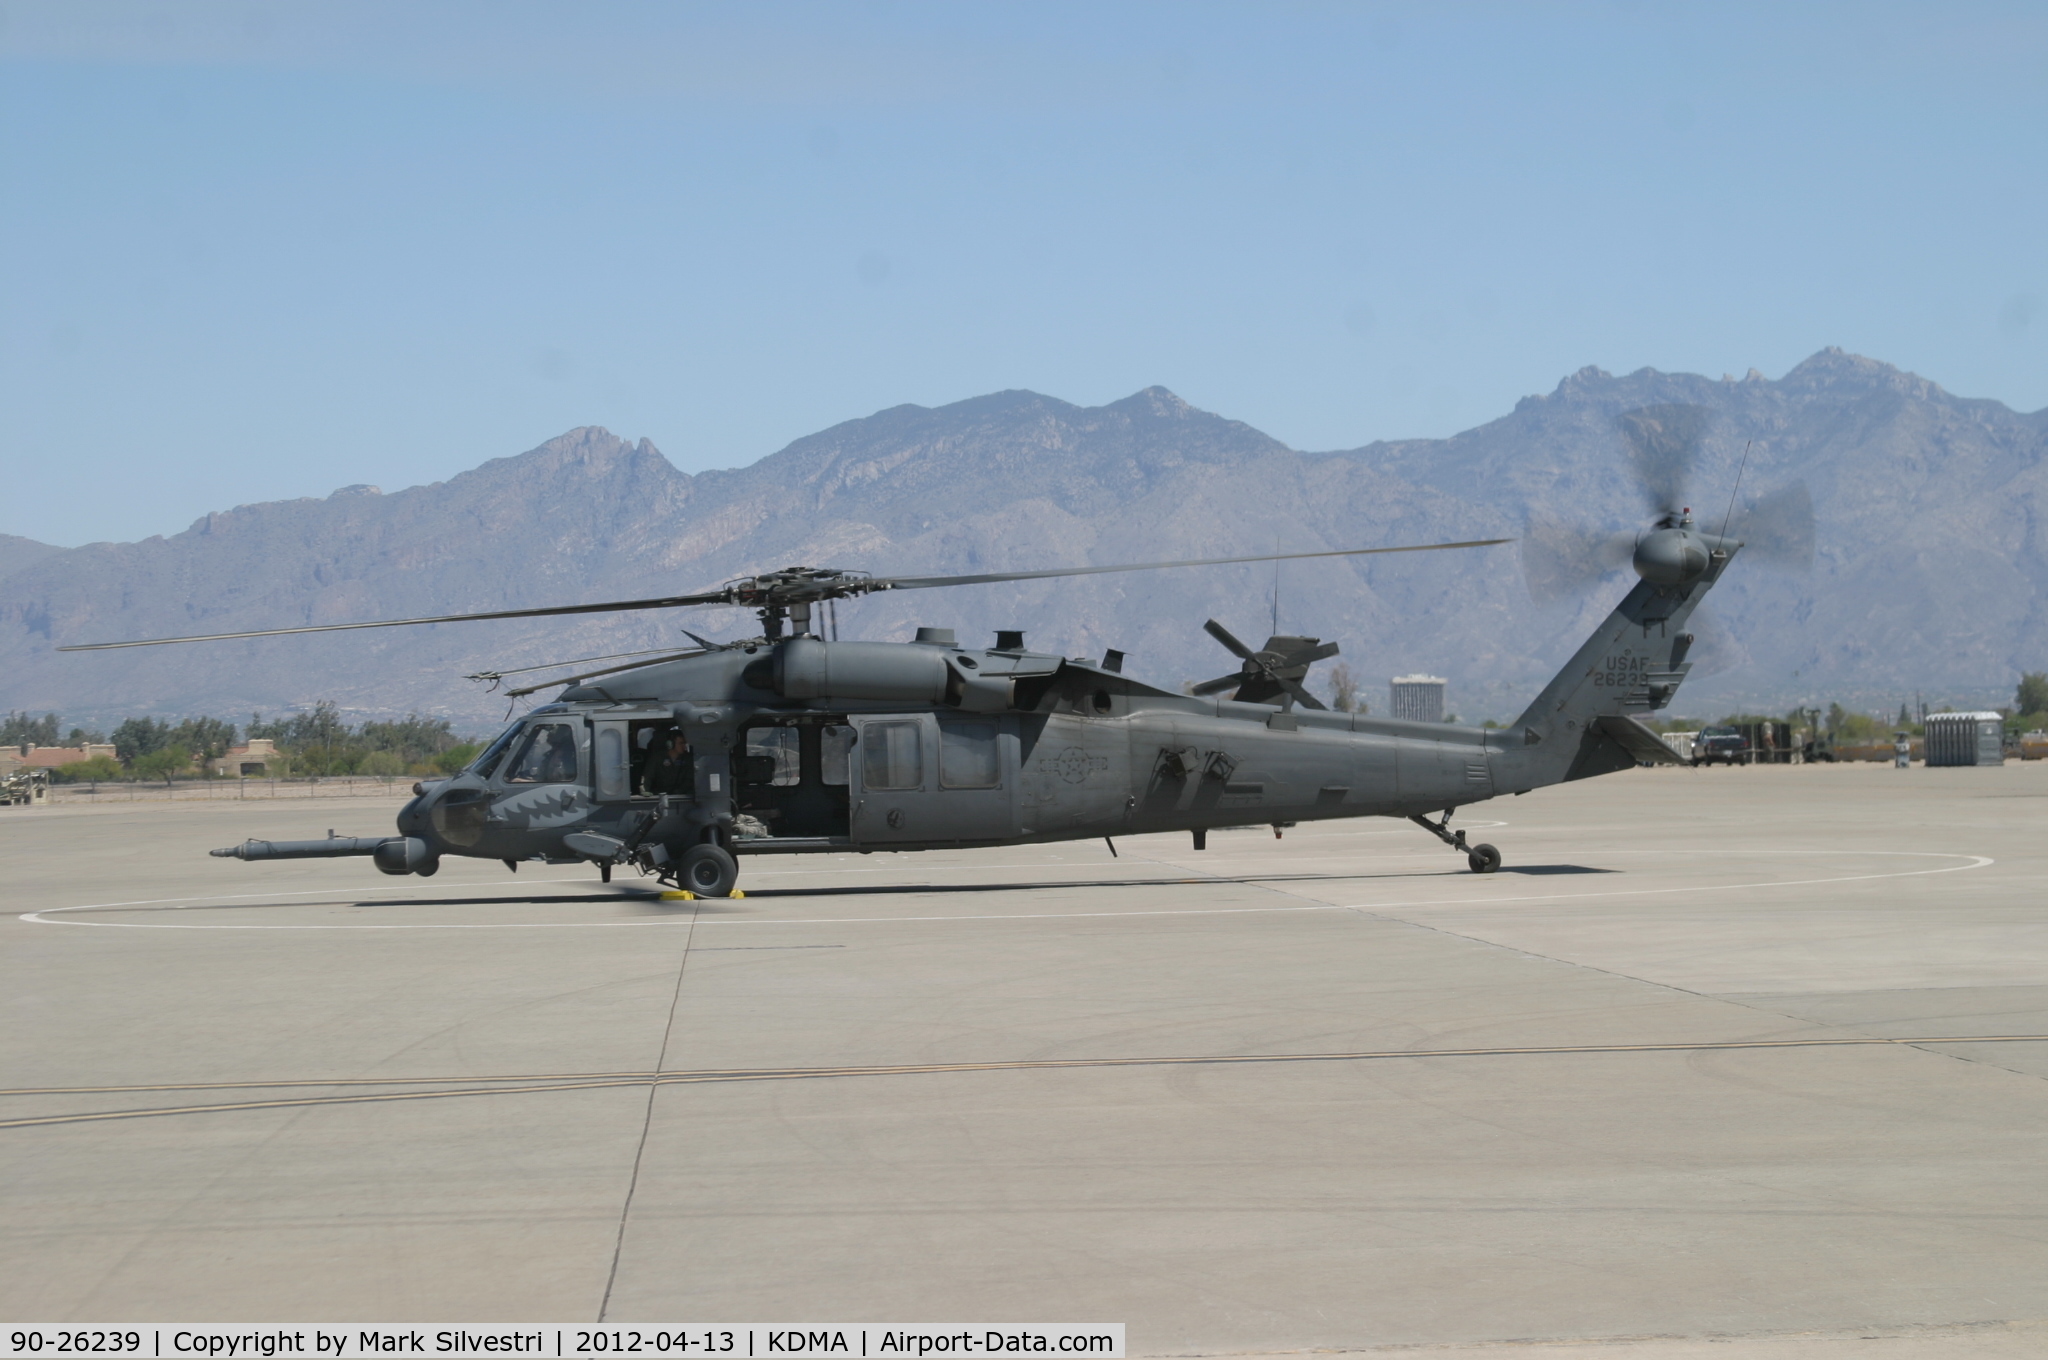 90-26239, 1990 Sikorsky HH-60G Pave Hawk C/N 70-1612, Davis Monthan Airshow Practice Day